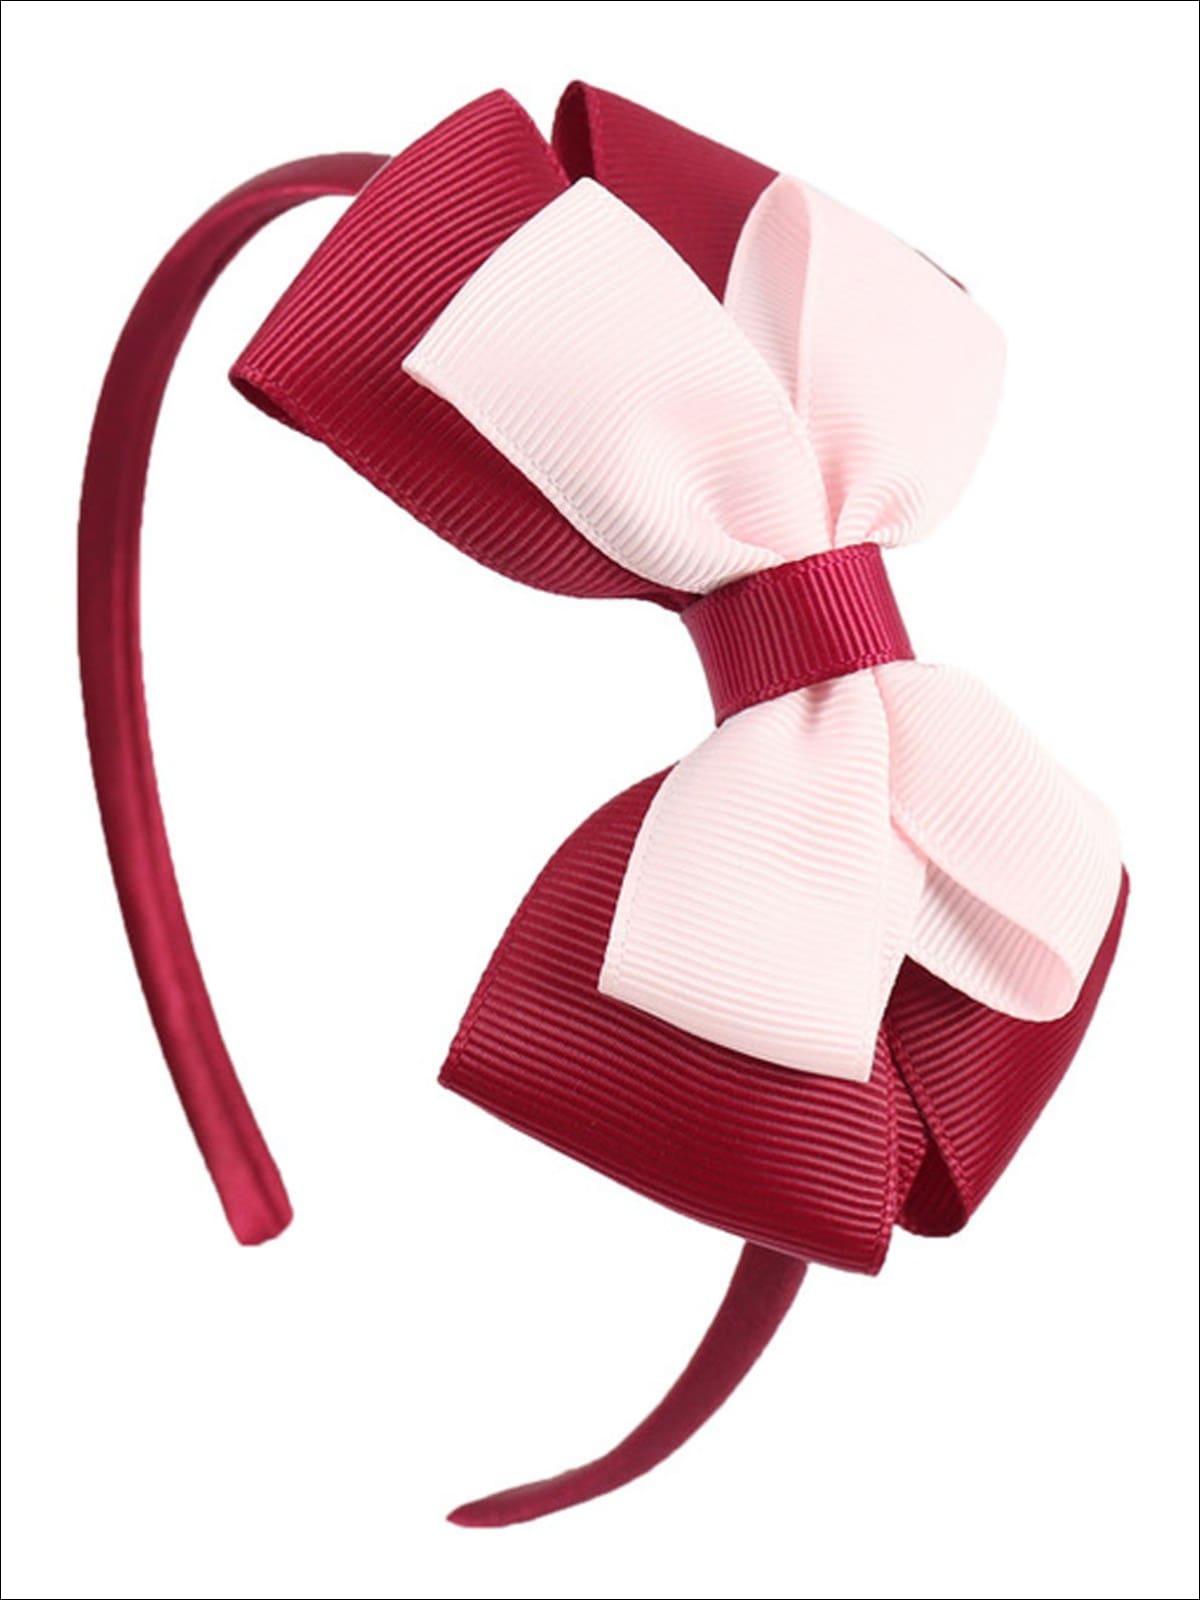 Mia Belle Girls Double Bow Ribbon Headband | Girls Accessories- Red - Hair Accessories